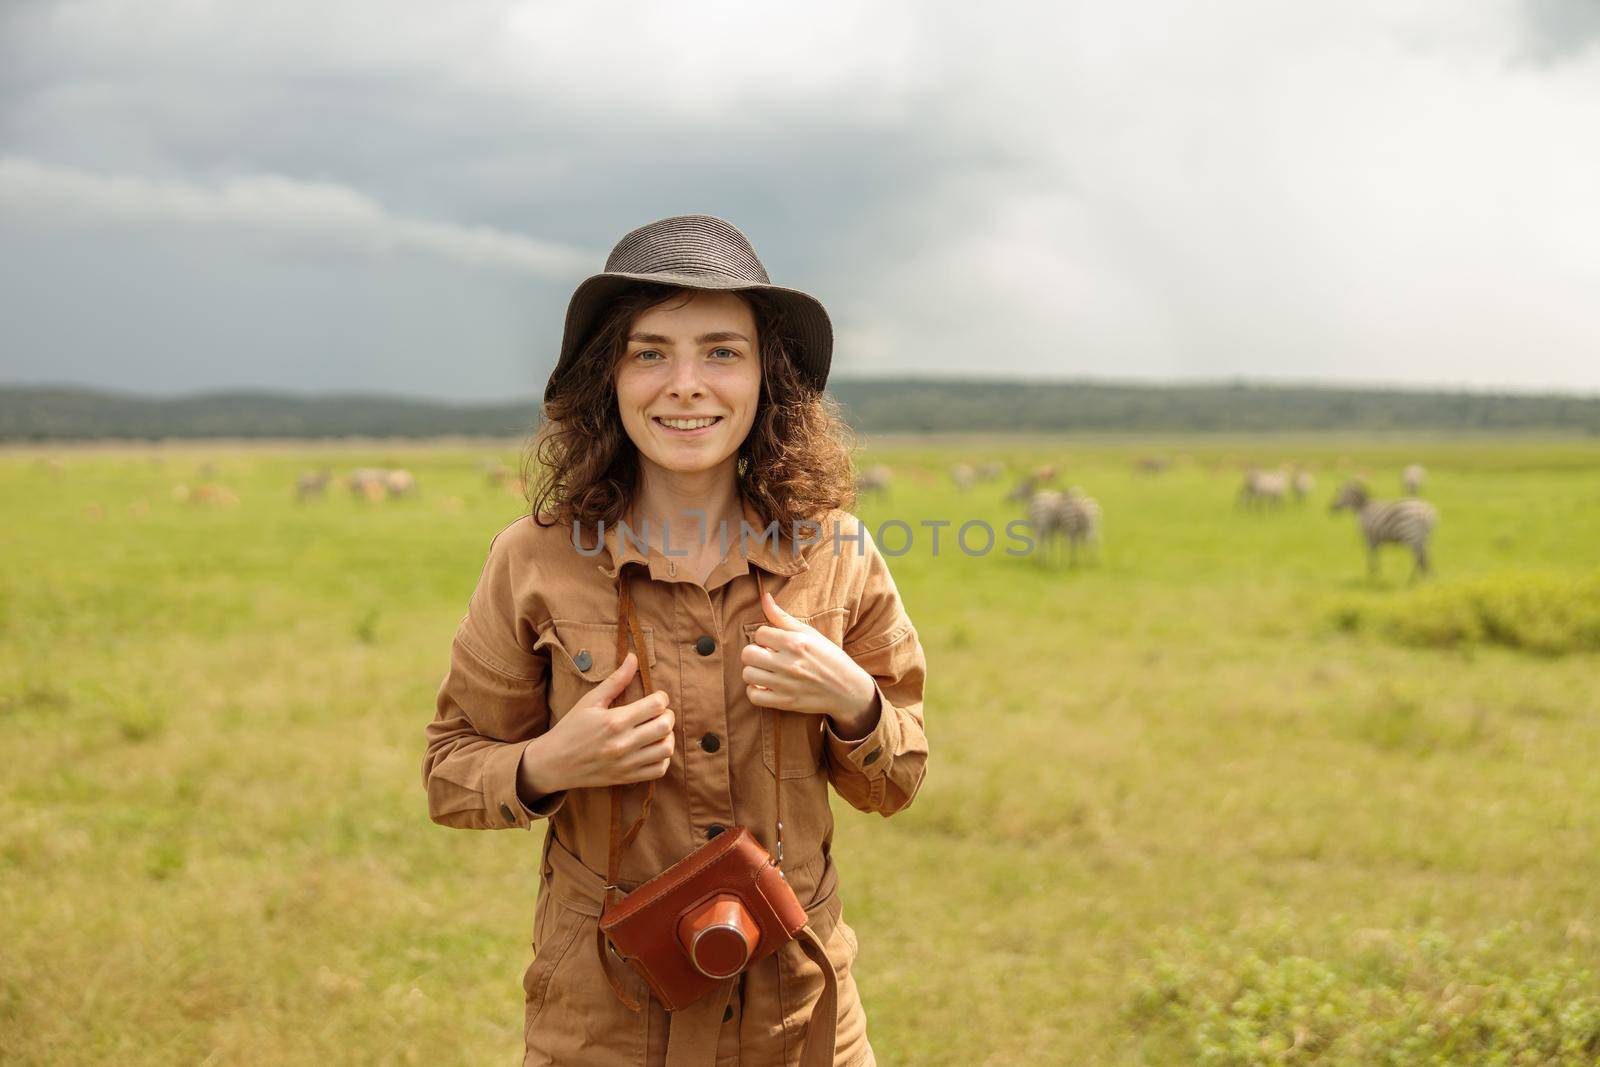 Smiling lady in hat standing in a national park in Africa with wild animals in the background